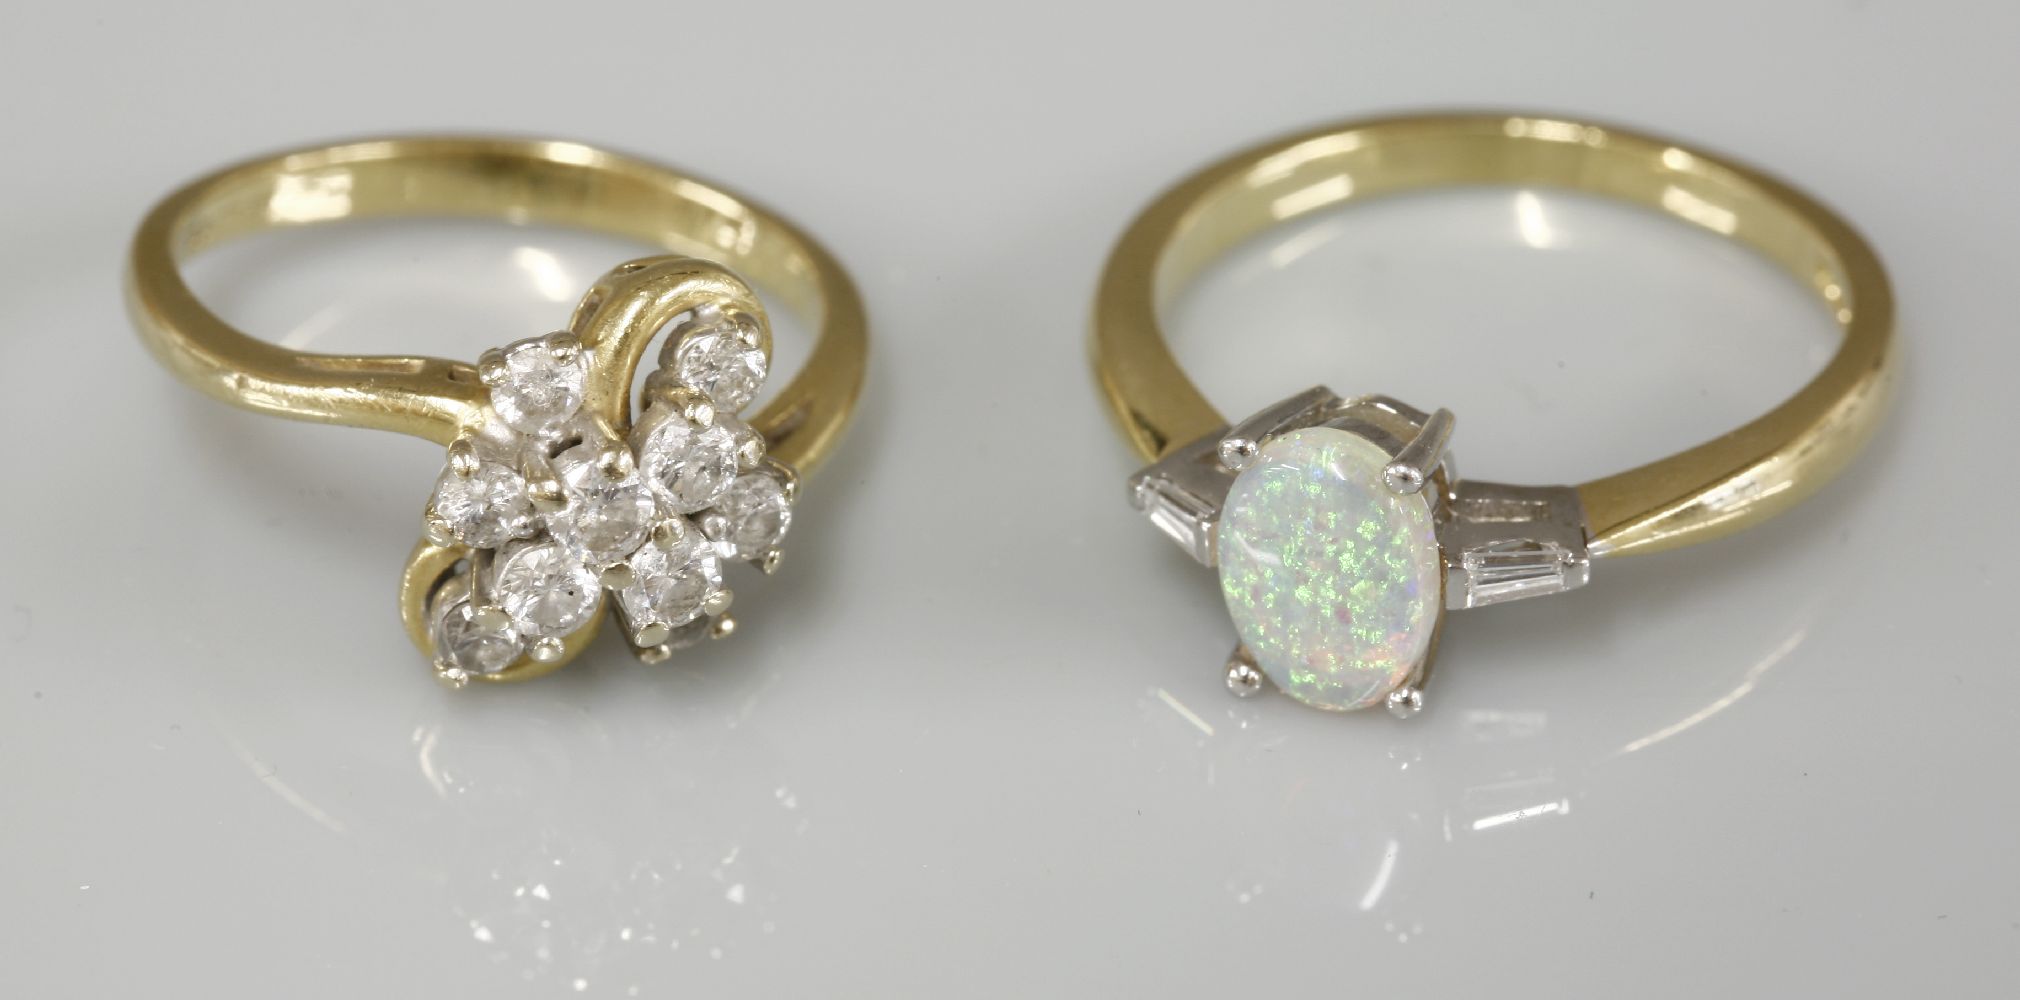 An 18ct gold single stone opal ring, with tapered baguette cut diamond shoulders, and an 18ct gold